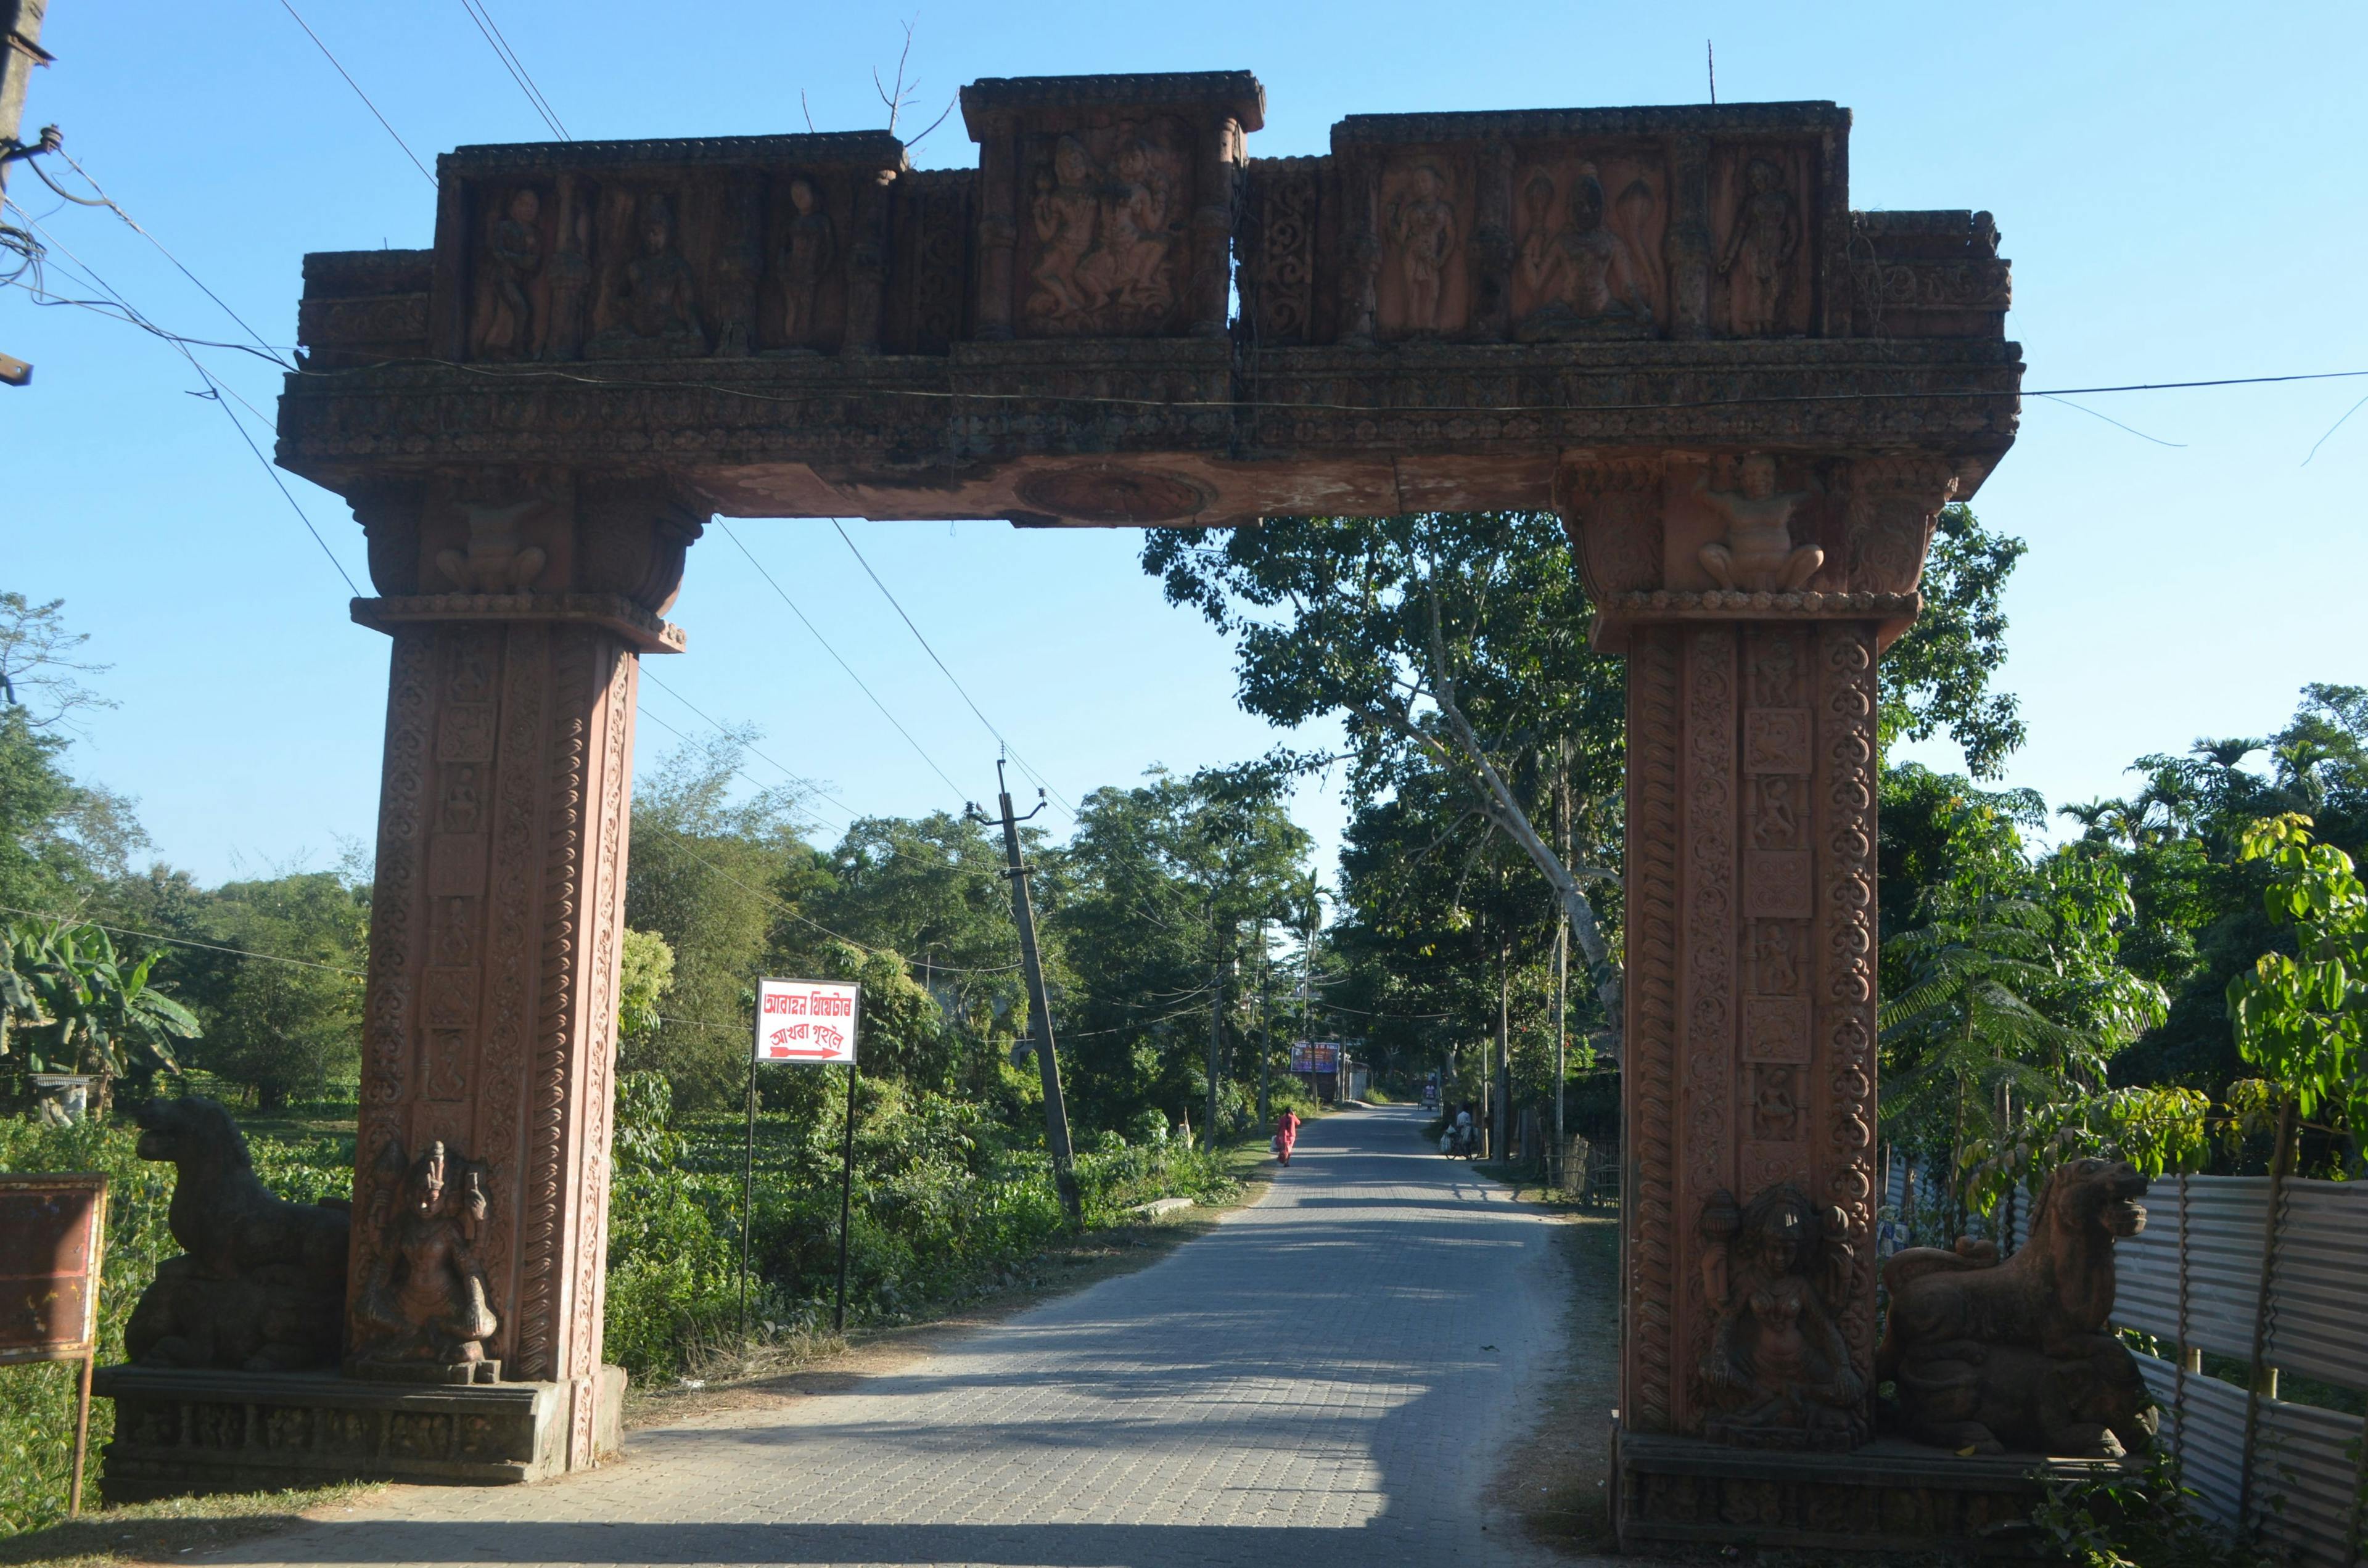 The engraved gate in the town